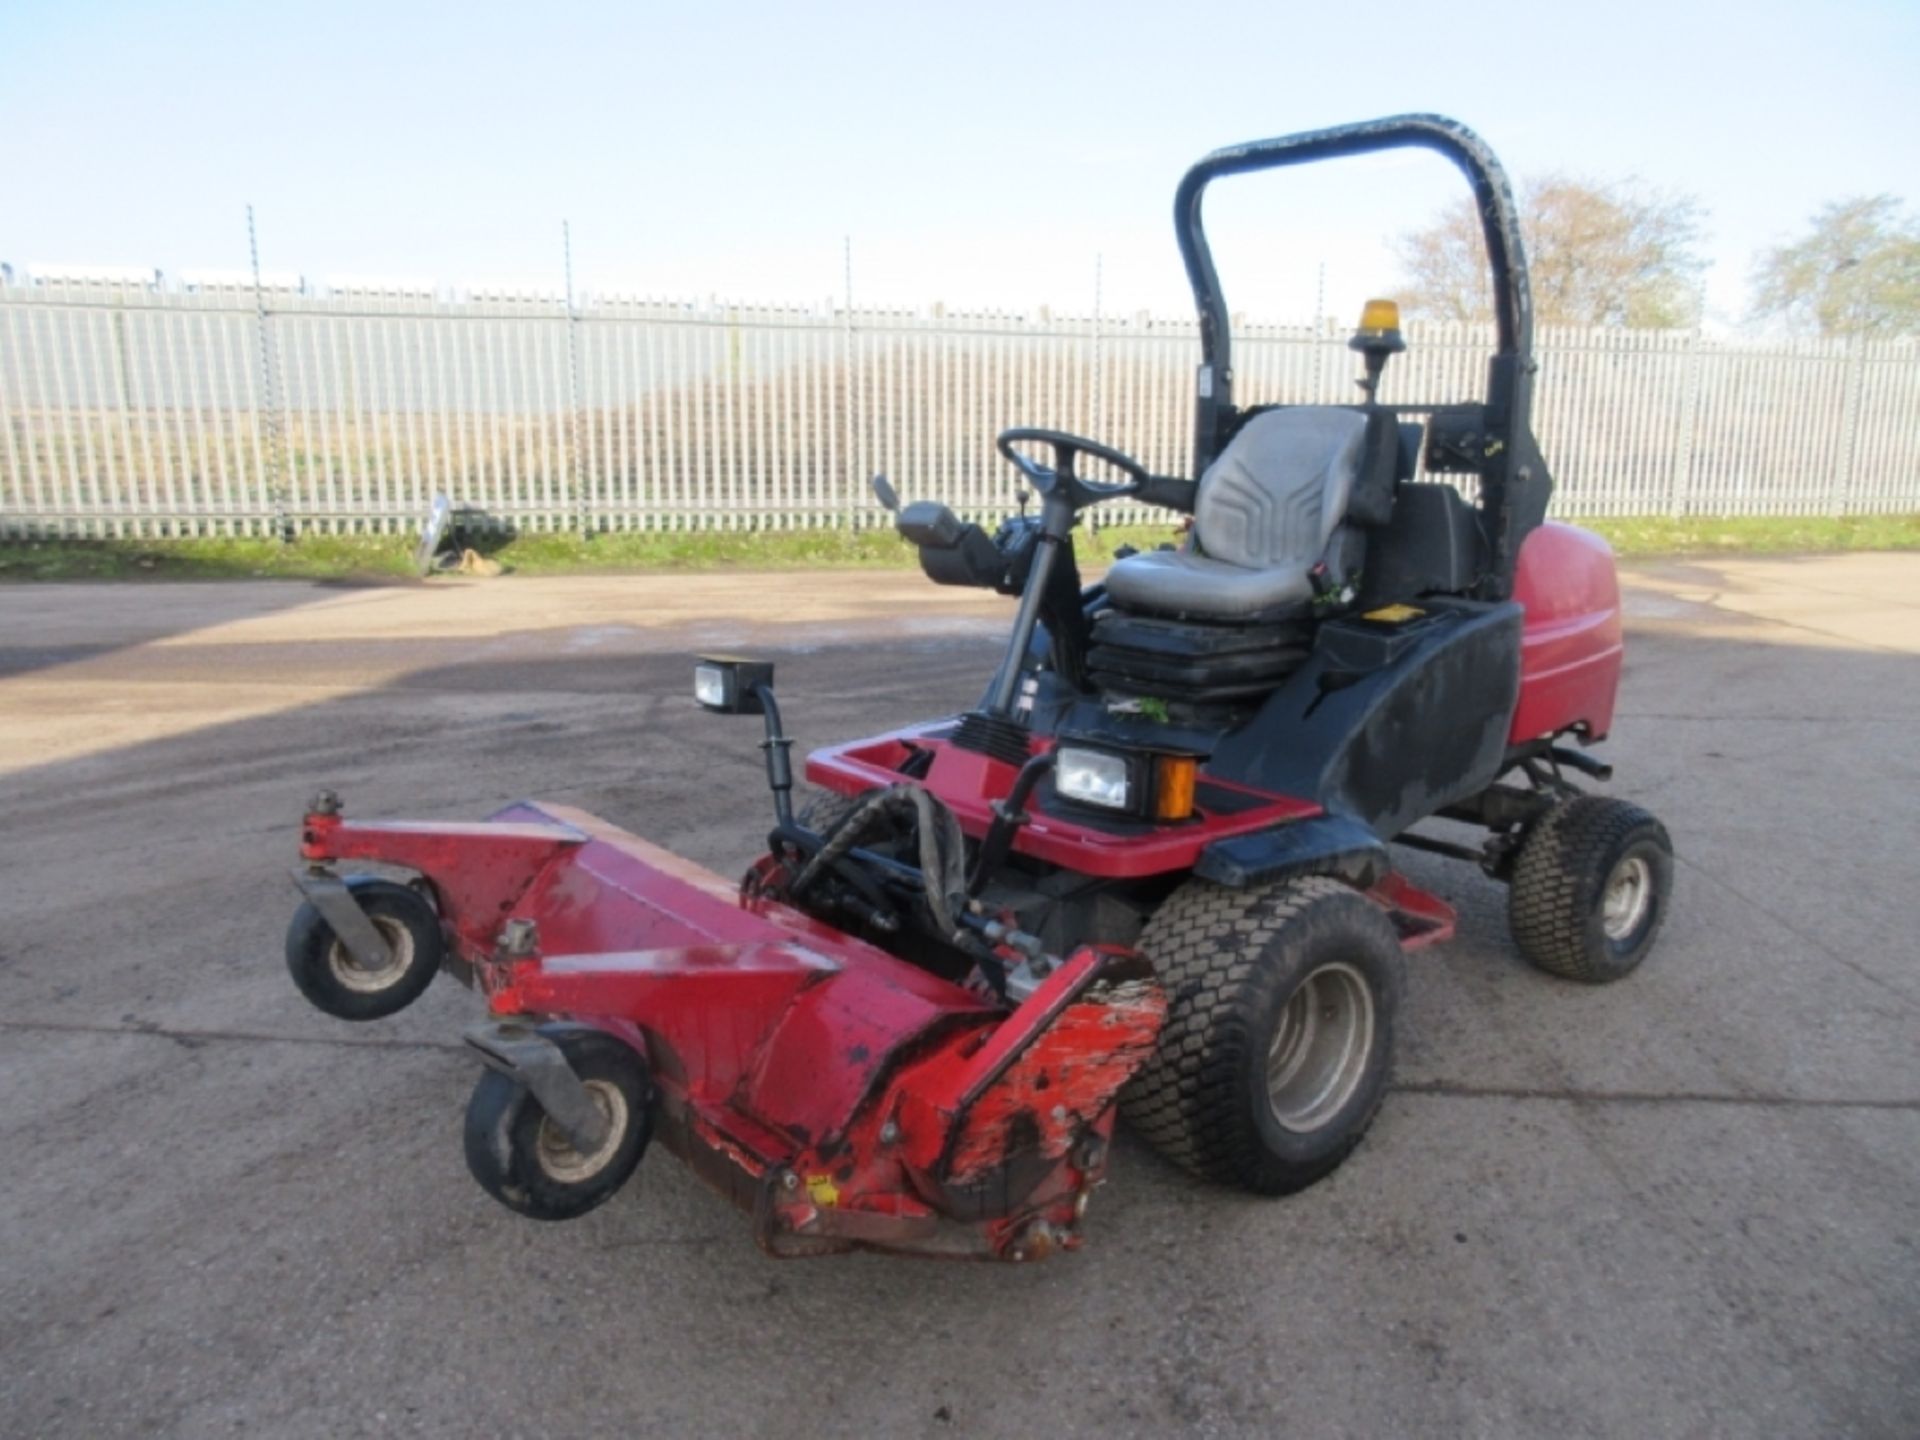 TORO GM3400 - 1498cc Plant Diesel Automatic - VIN: 30651314000111 - Year: 2015 - 2,123 Hours -